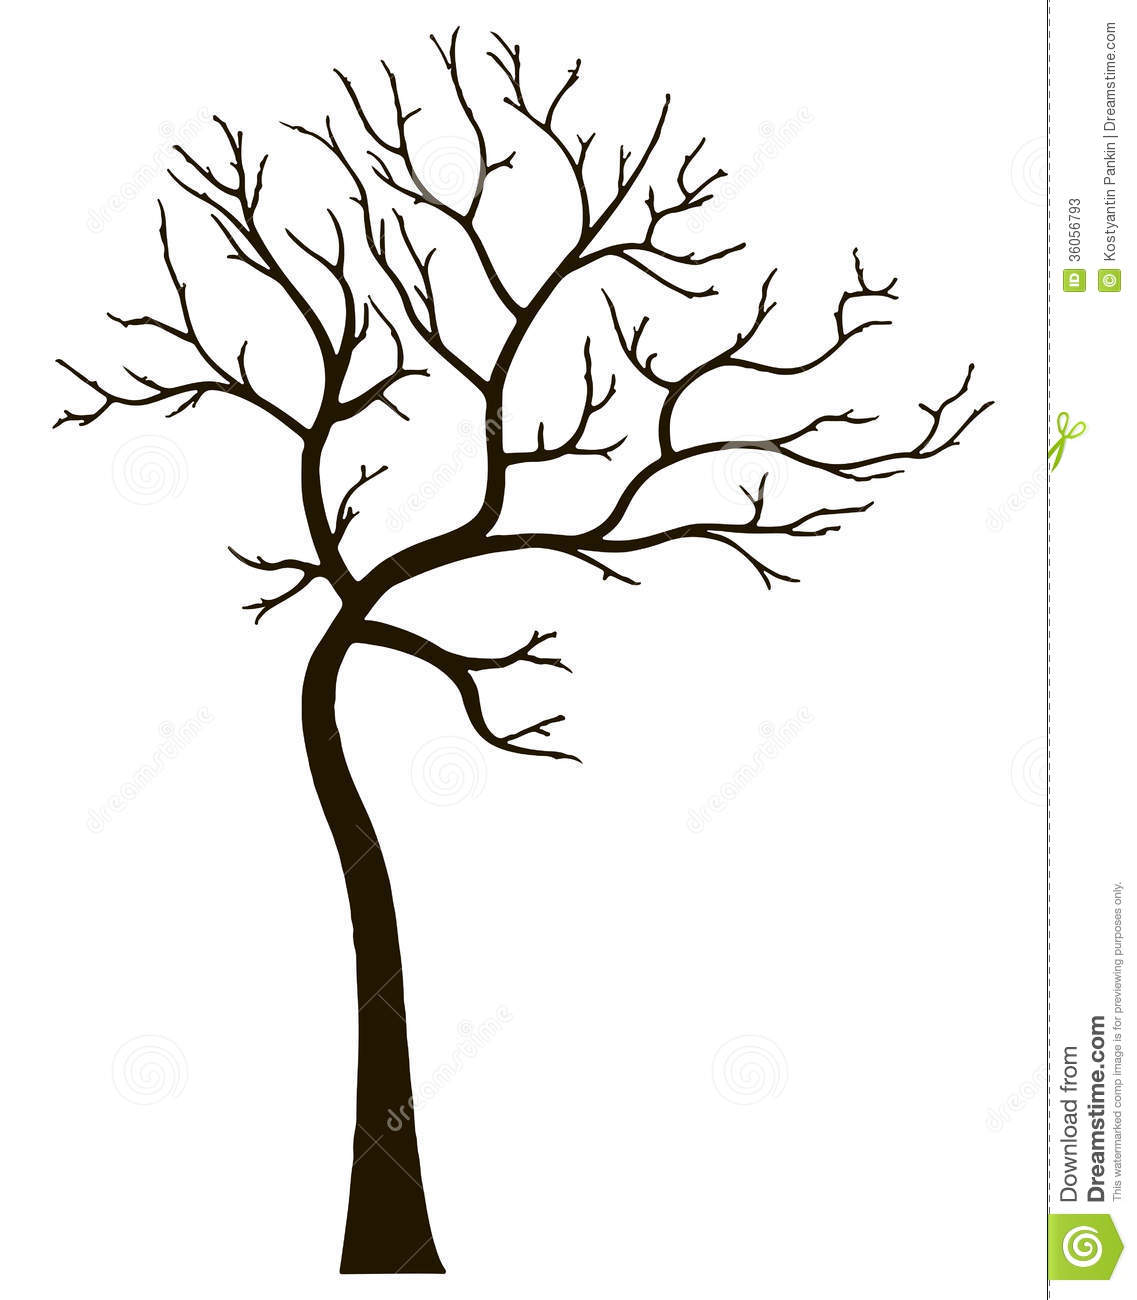 Clip Art Tree No Leaves   Clipart Panda   Free Clipart Images